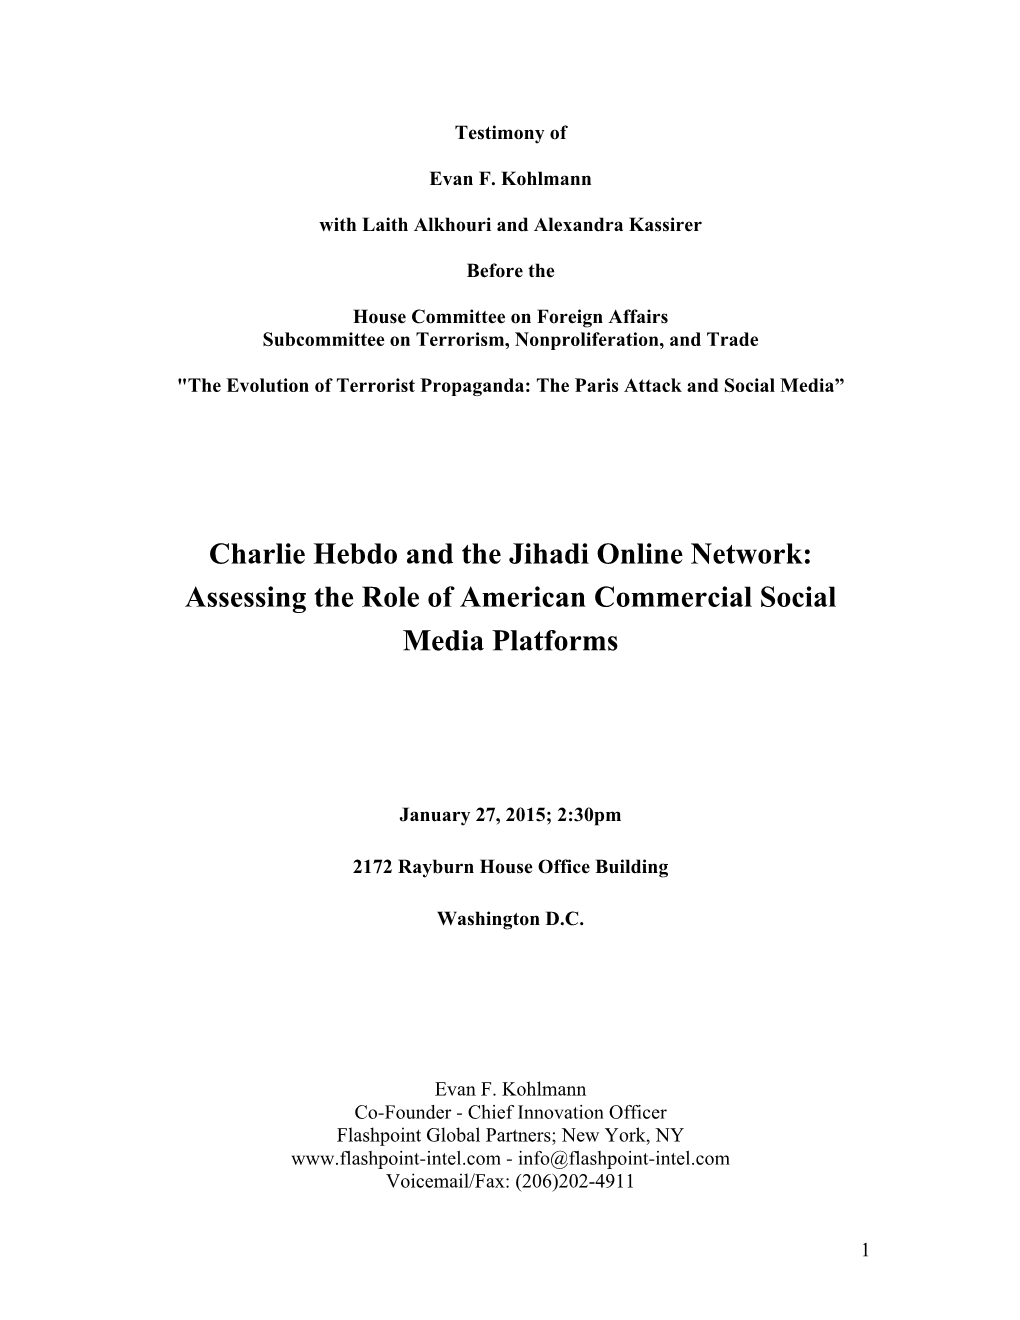 Charlie Hebdo and the Jihadi Online Network: Assessing the Role of American Commercial Social Media Platforms